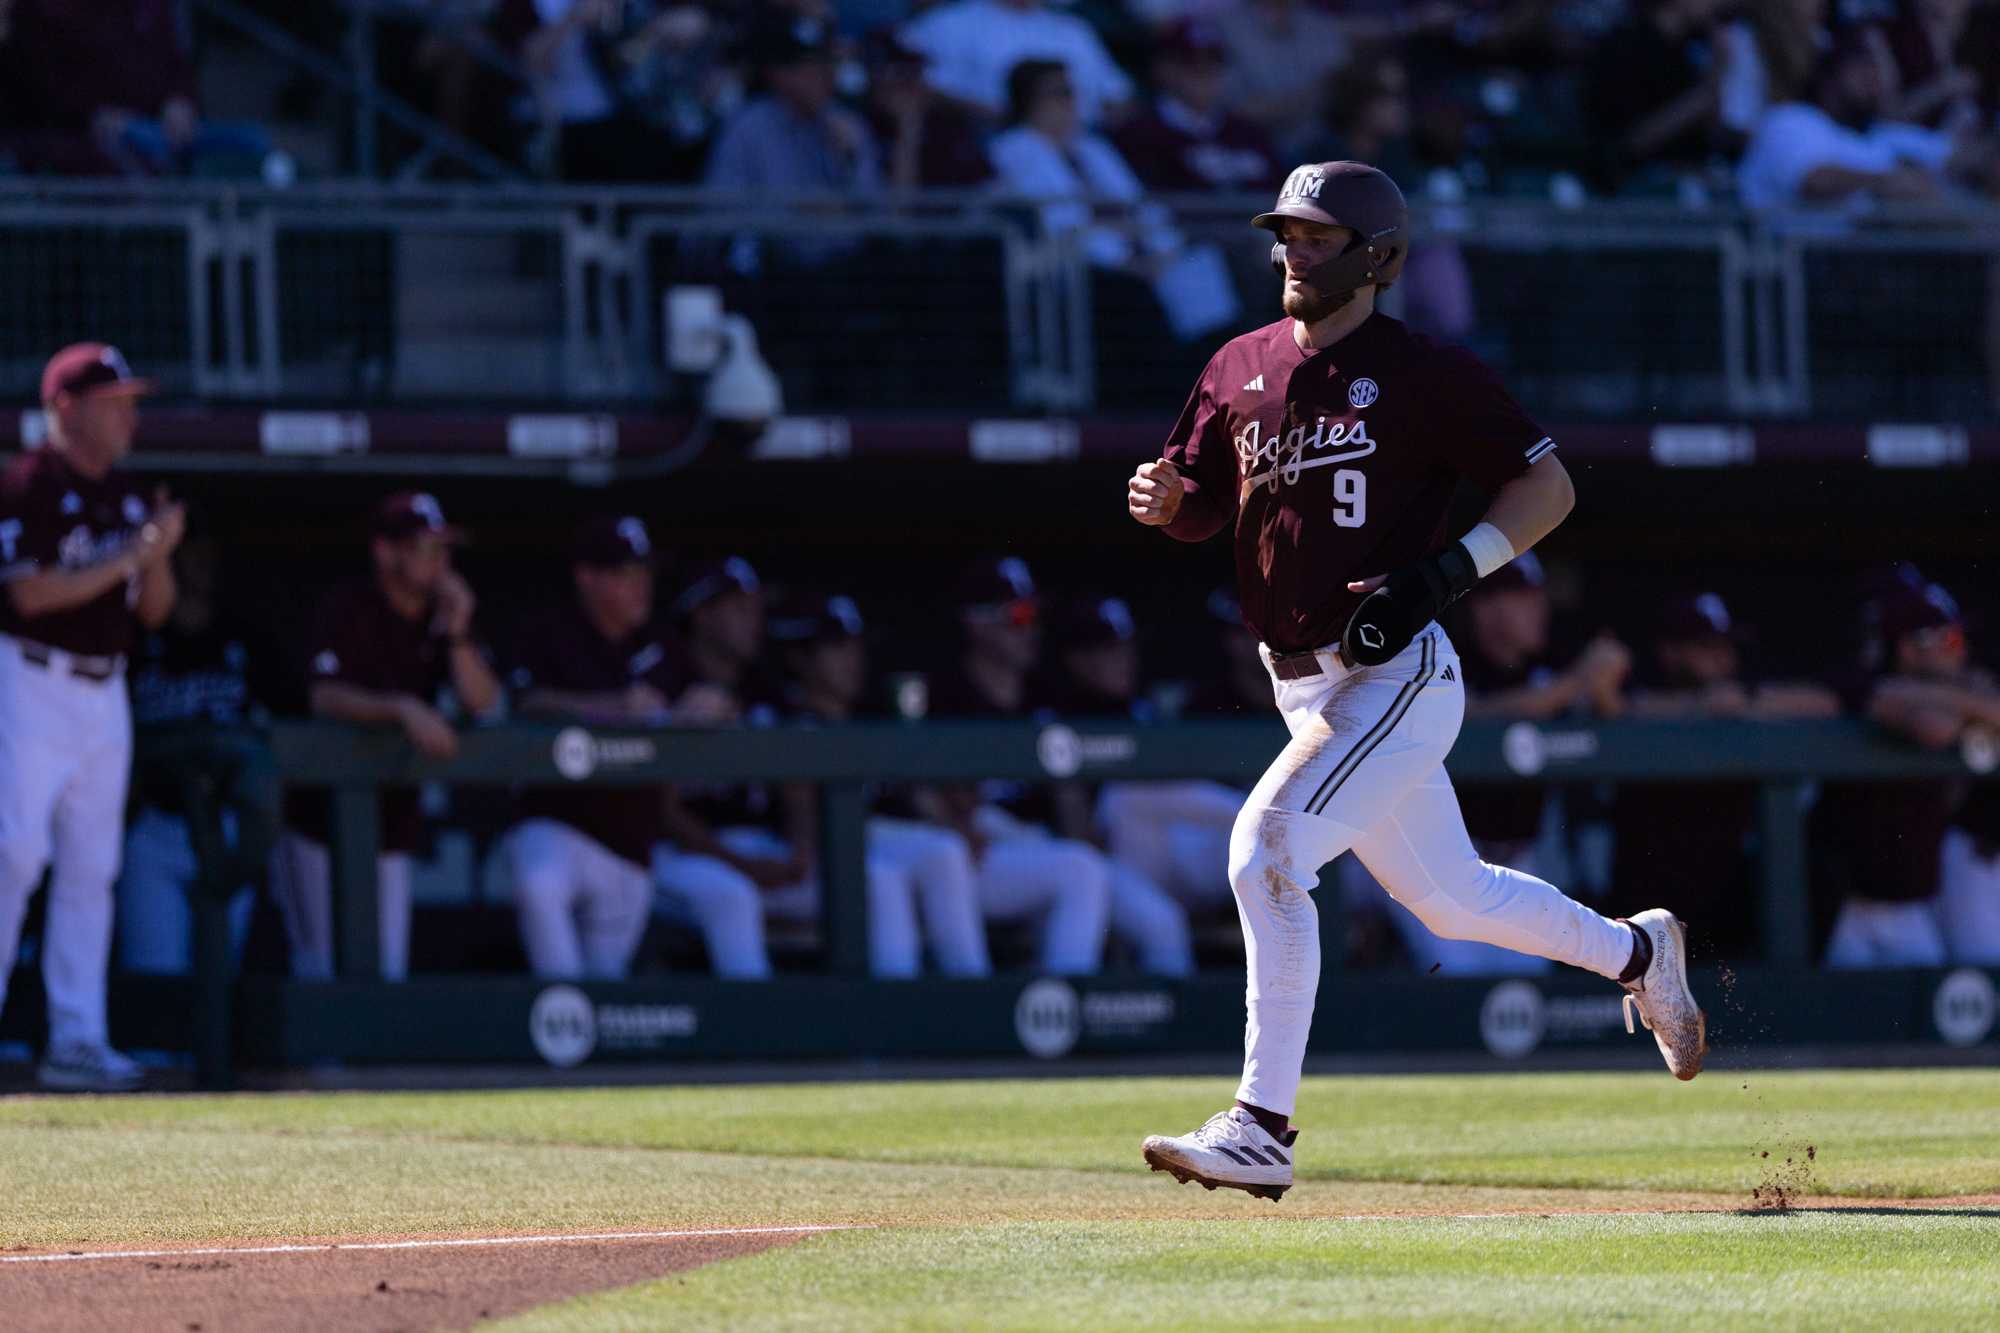 Eventful+sixth+inning+highlights+A%26M%E2%80%99s+2-0+win+over+Wagner